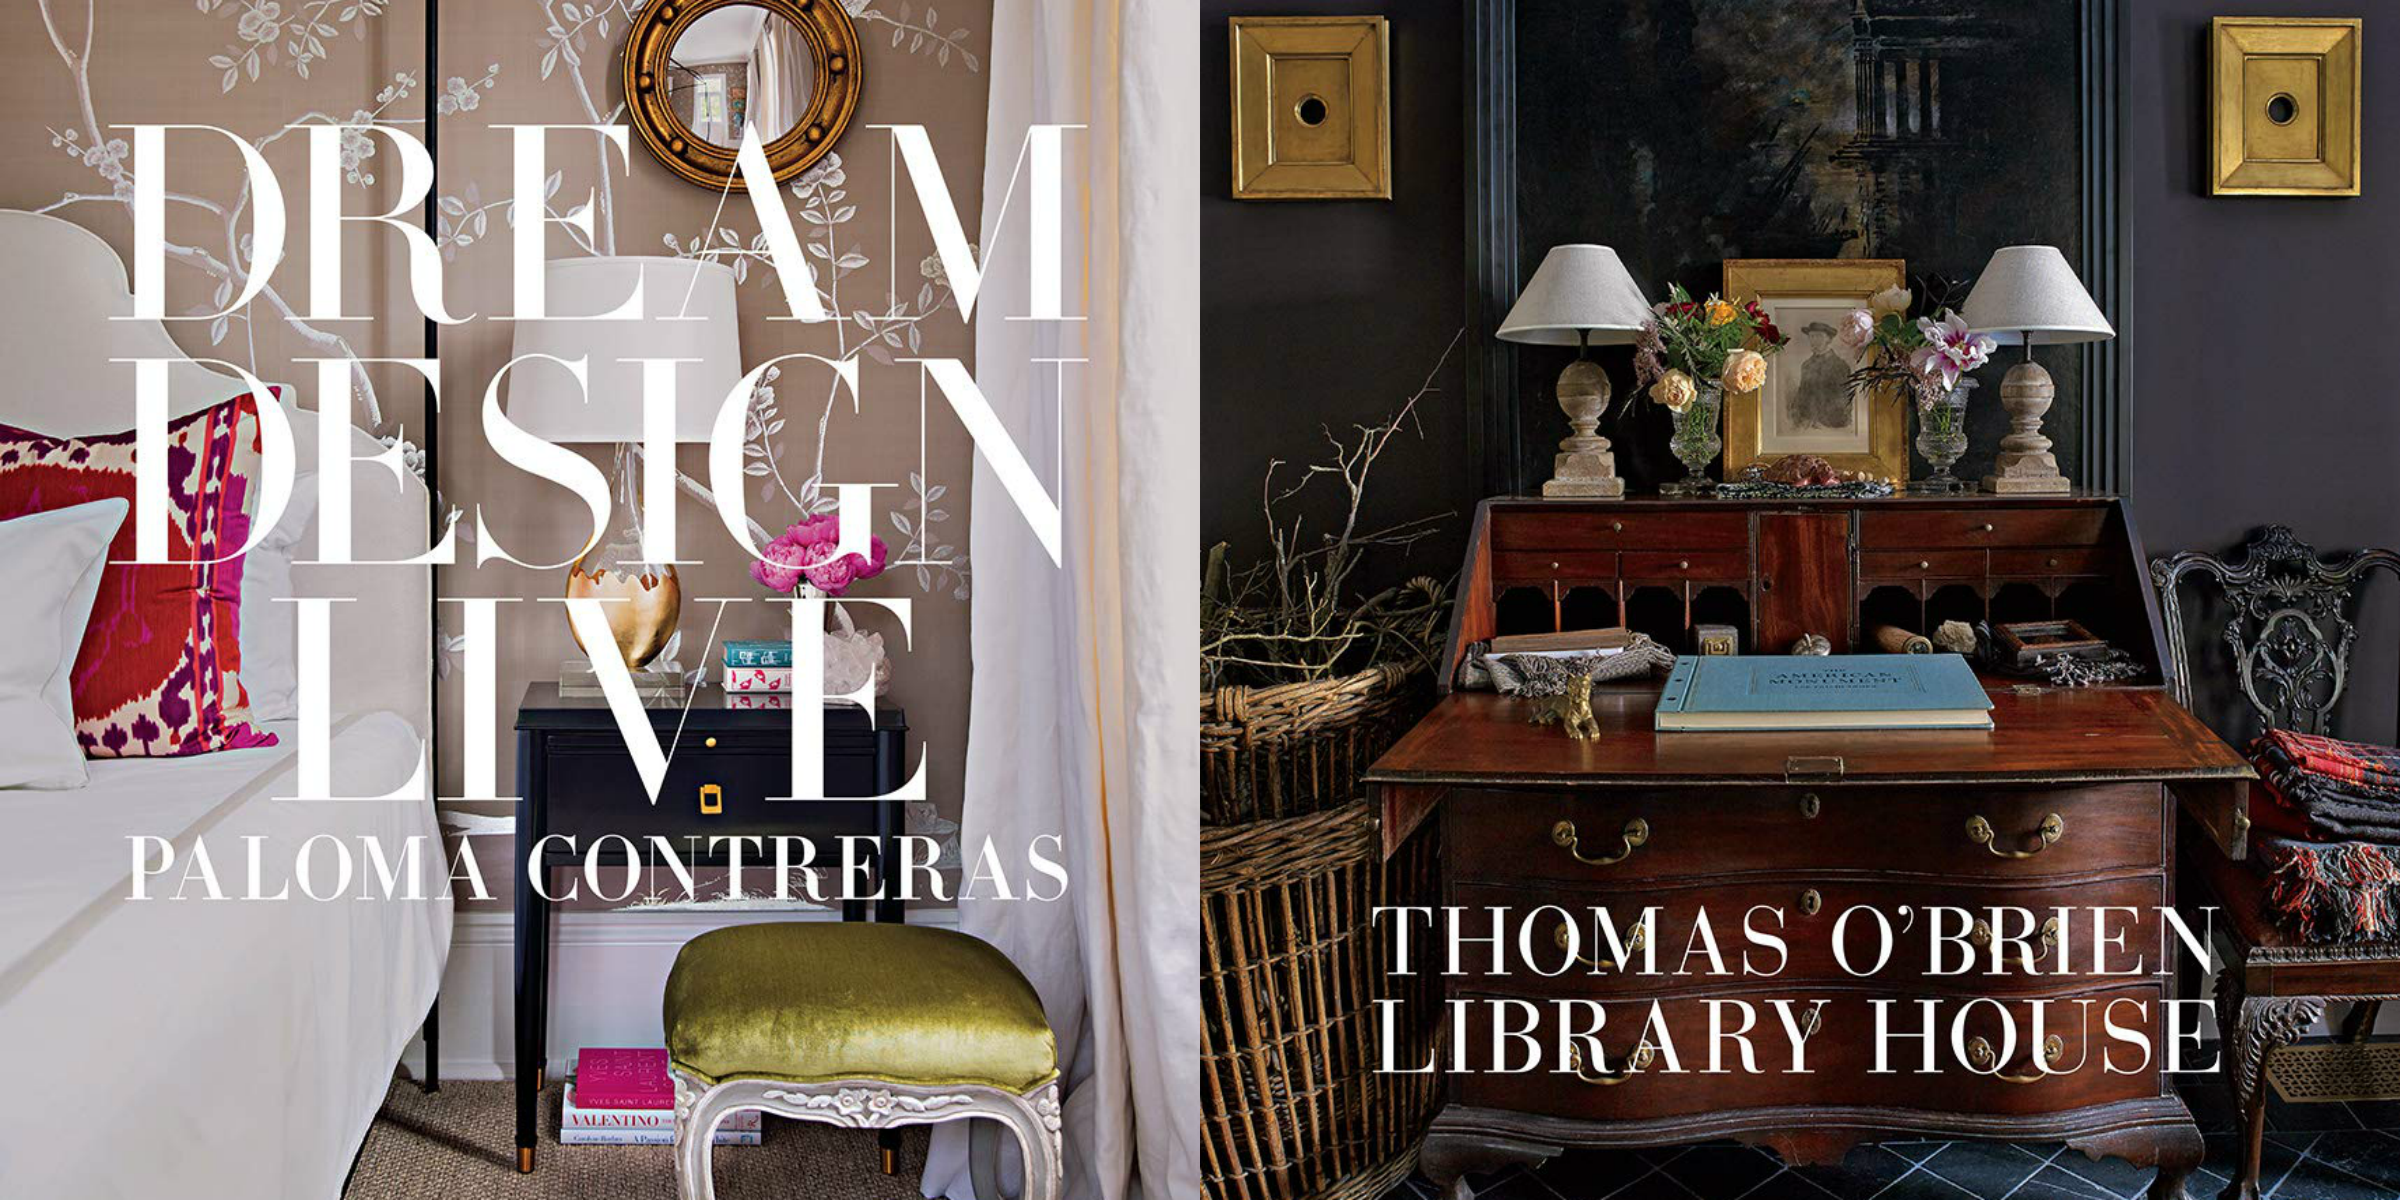 11 Best Interior Design Books To Buy In 2018 Our Favorite